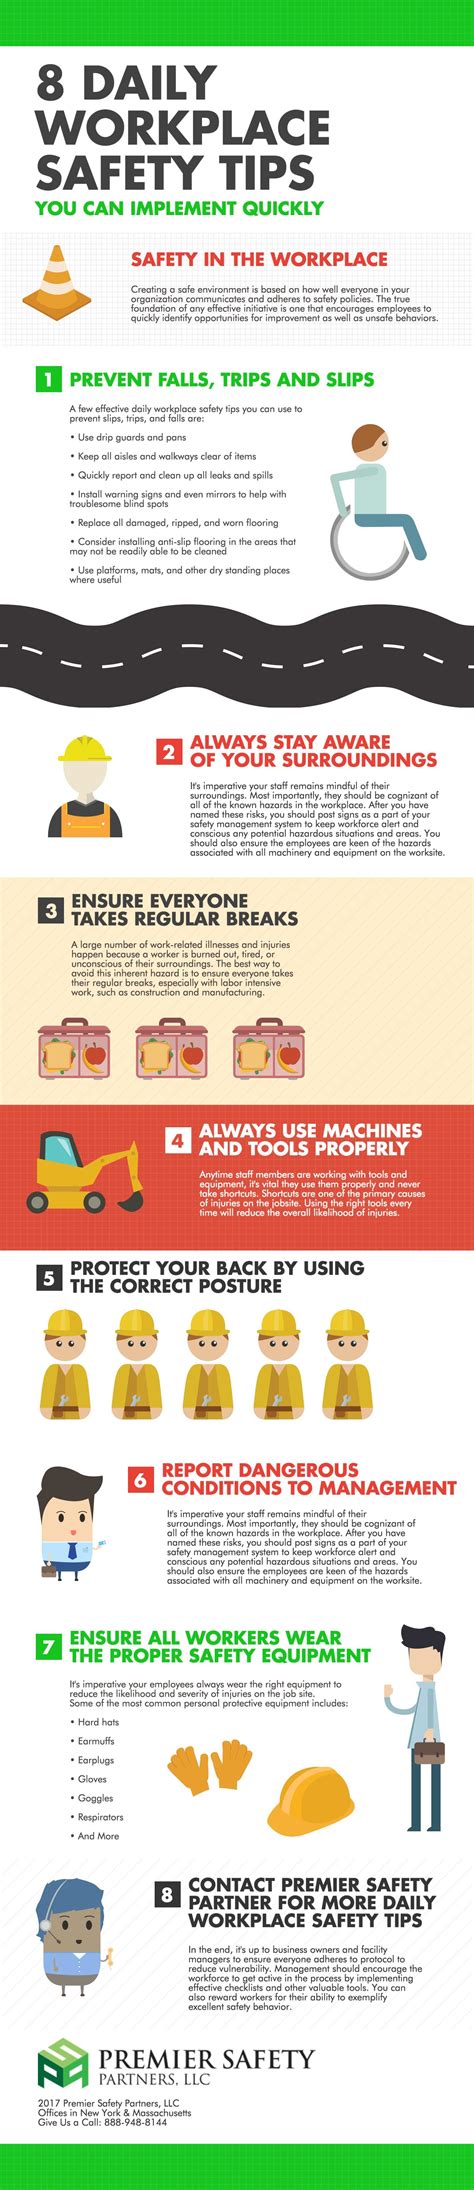 Safety Tips Image